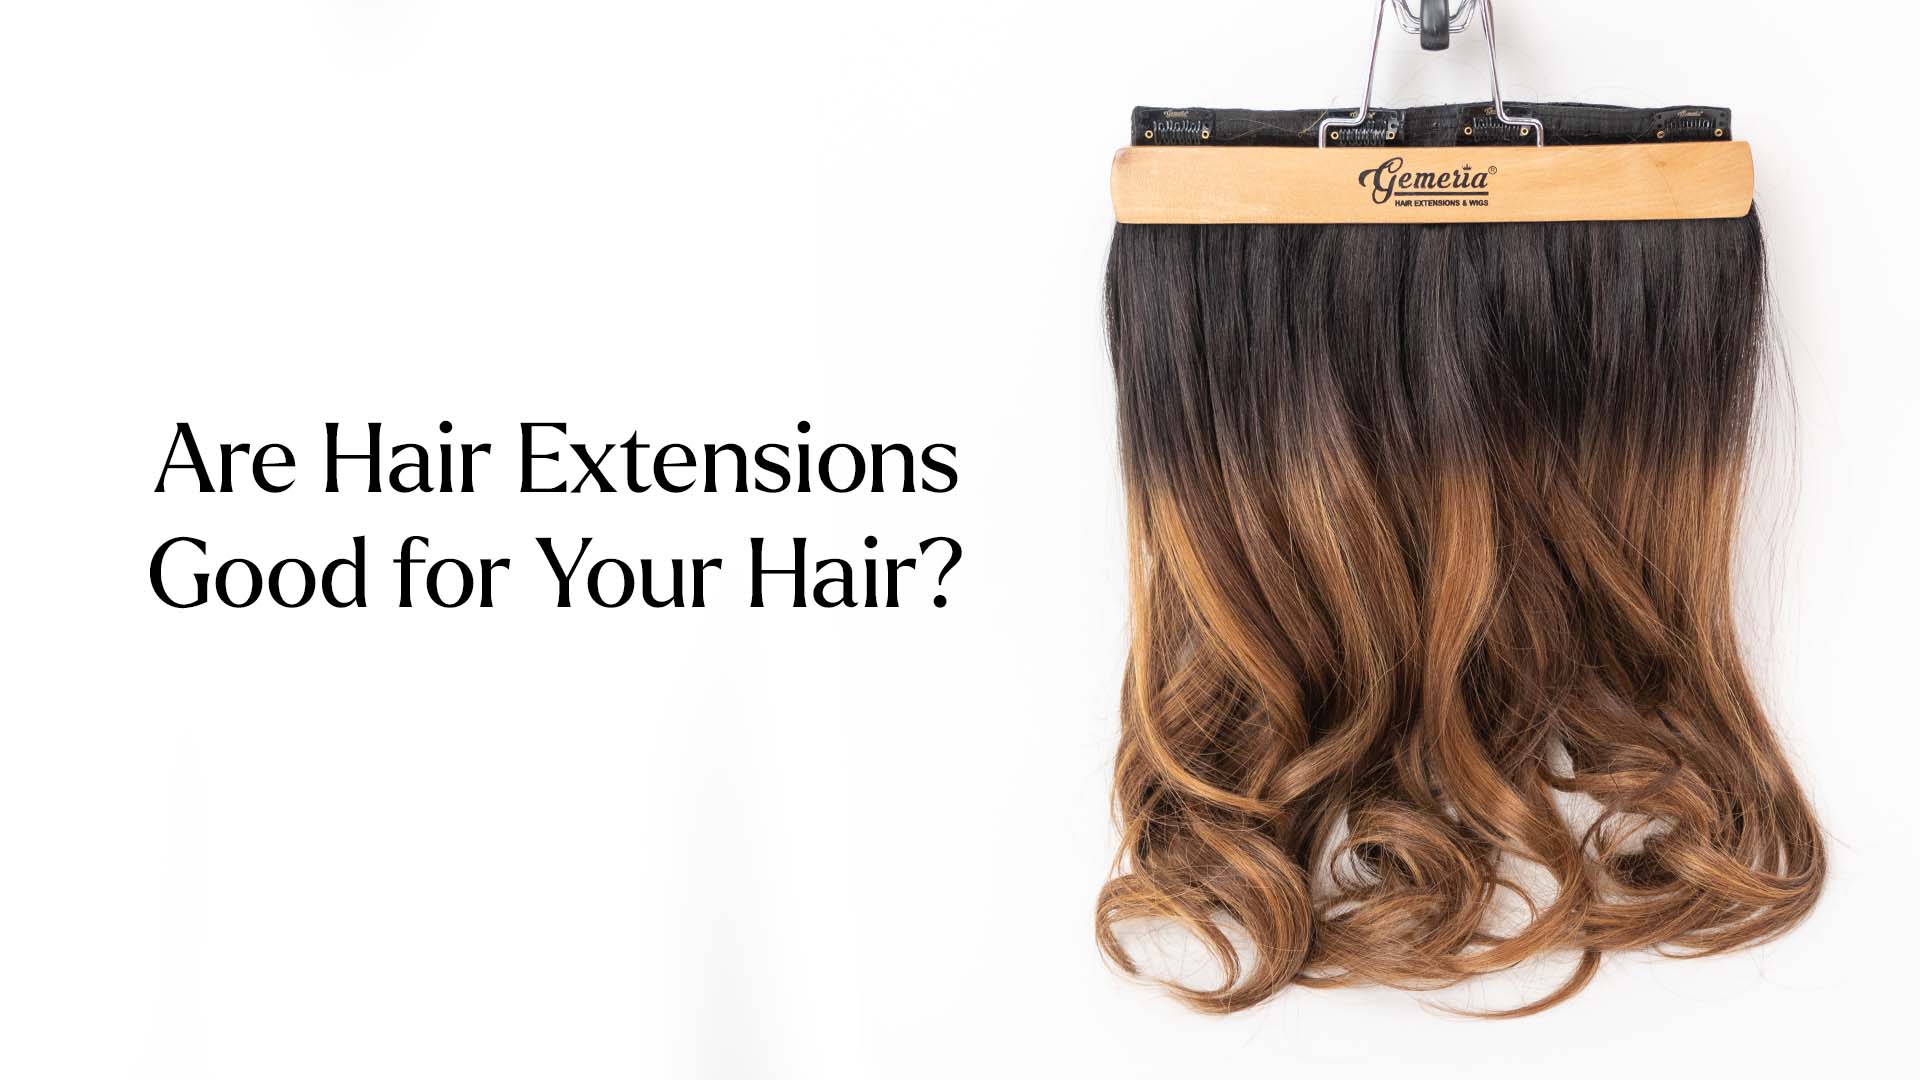 Are Hair Extensions Good for Your Hair?